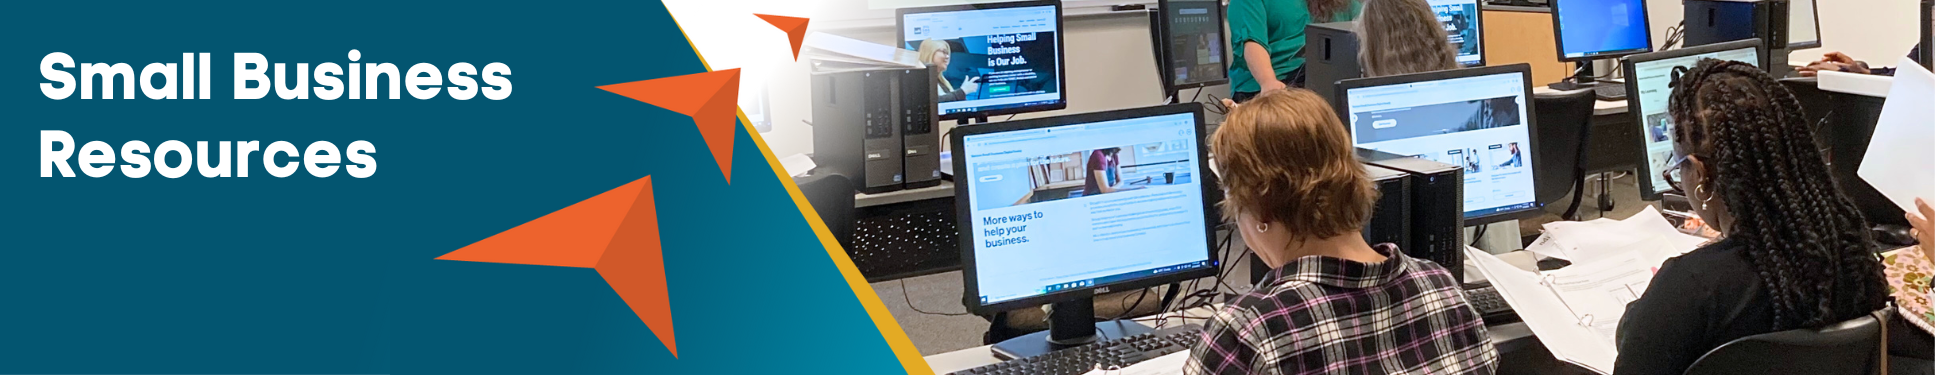 Small Business Resources Banner with three orange arrows pointing to image of two adults sitting in front of computers.